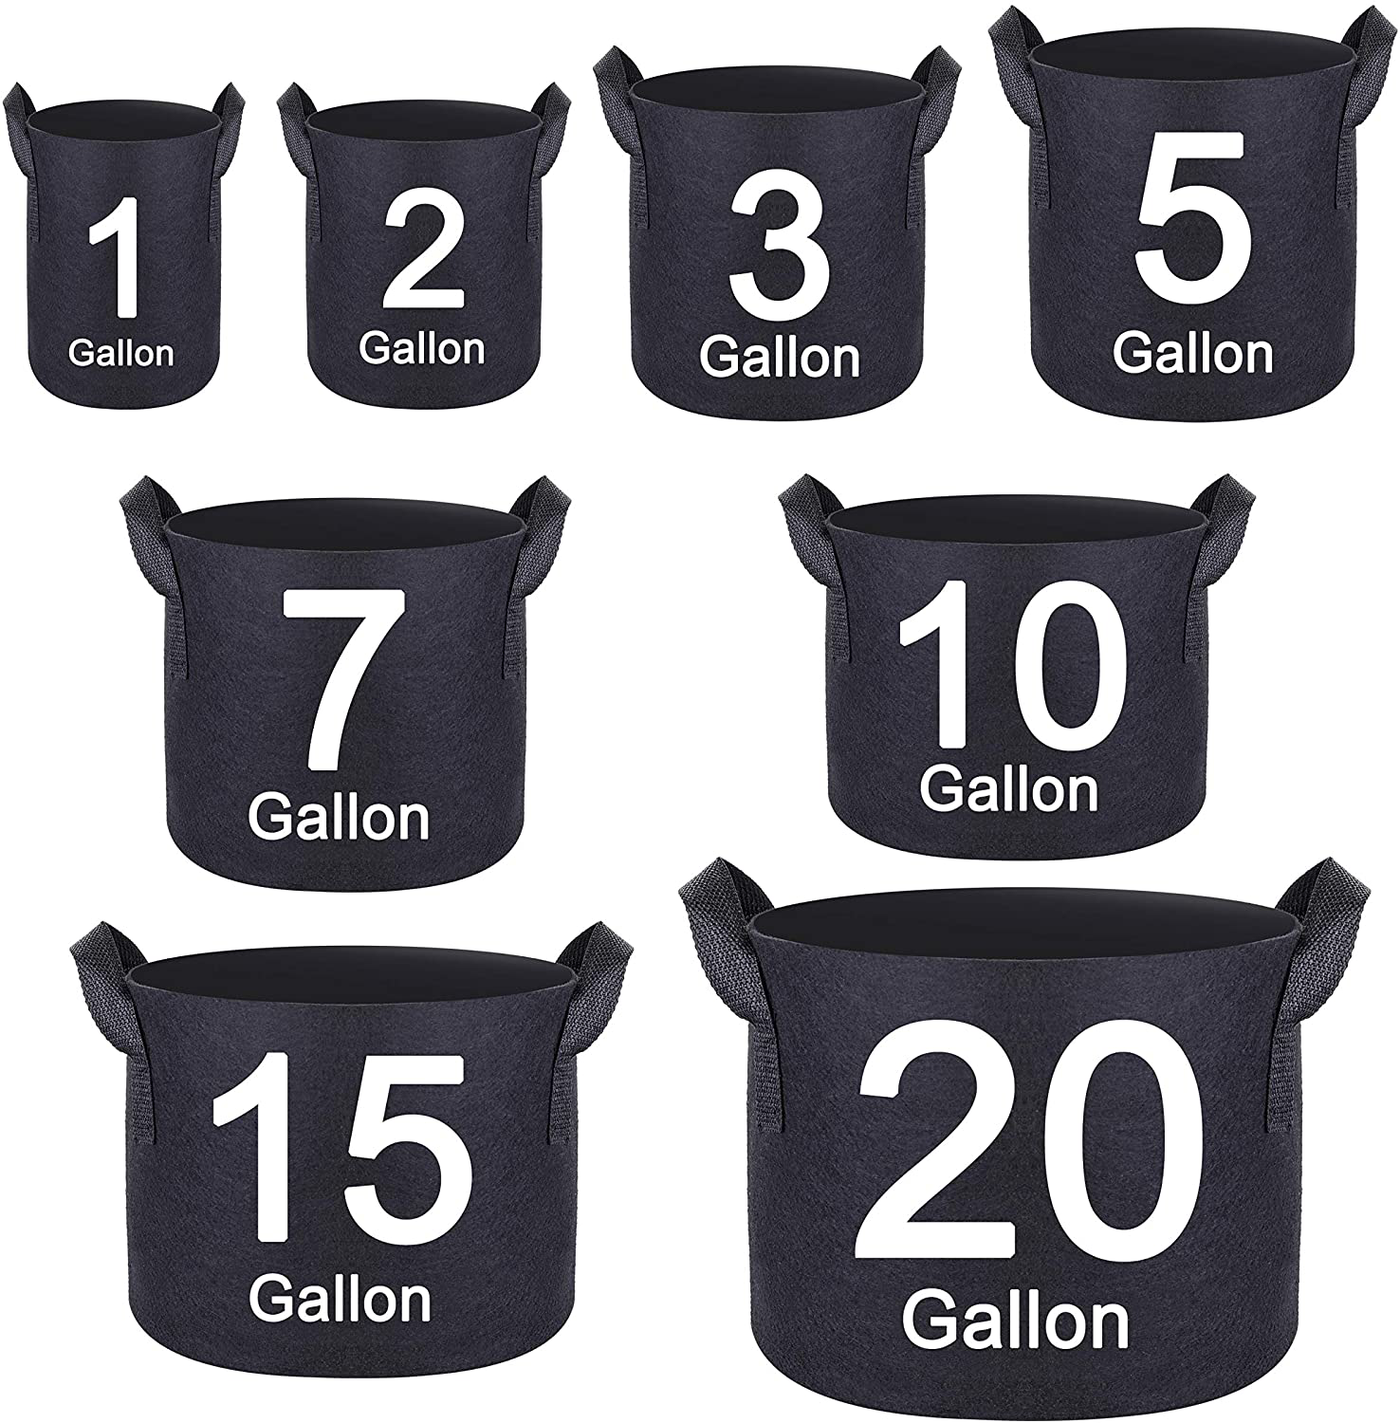 6-Pack 2 Gallons Plant Grow Bags,Heavy Duty Thickened Nonwoven Fabric Pots Grow Bags with Handles,Indoor Outdoor Grow Containers Black